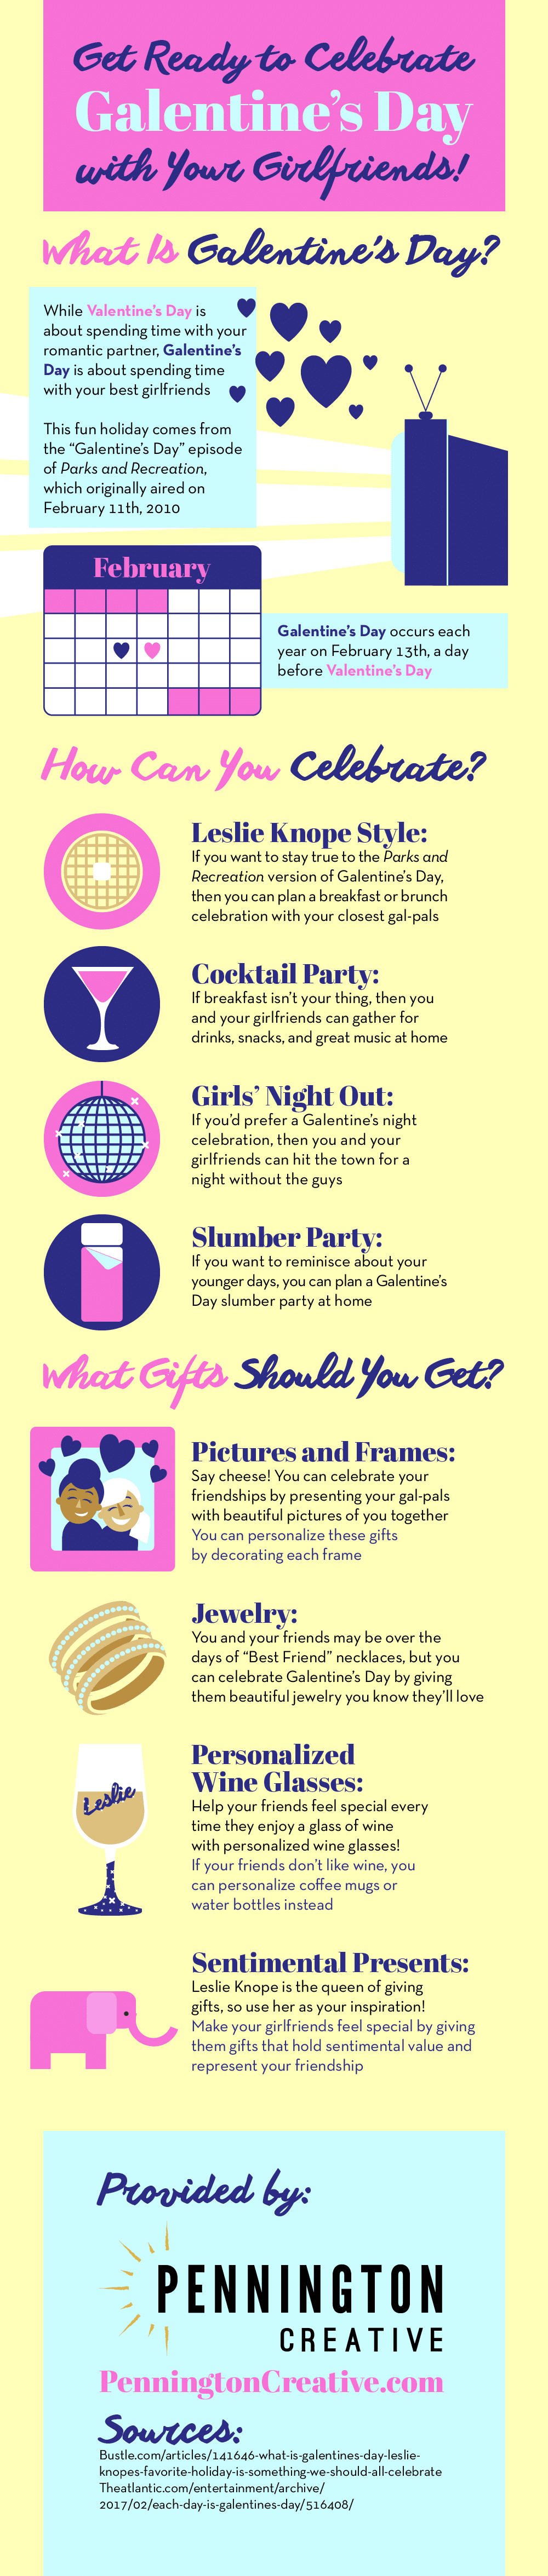 Infographic with tips for celebrating Galentine's Day on February 13.